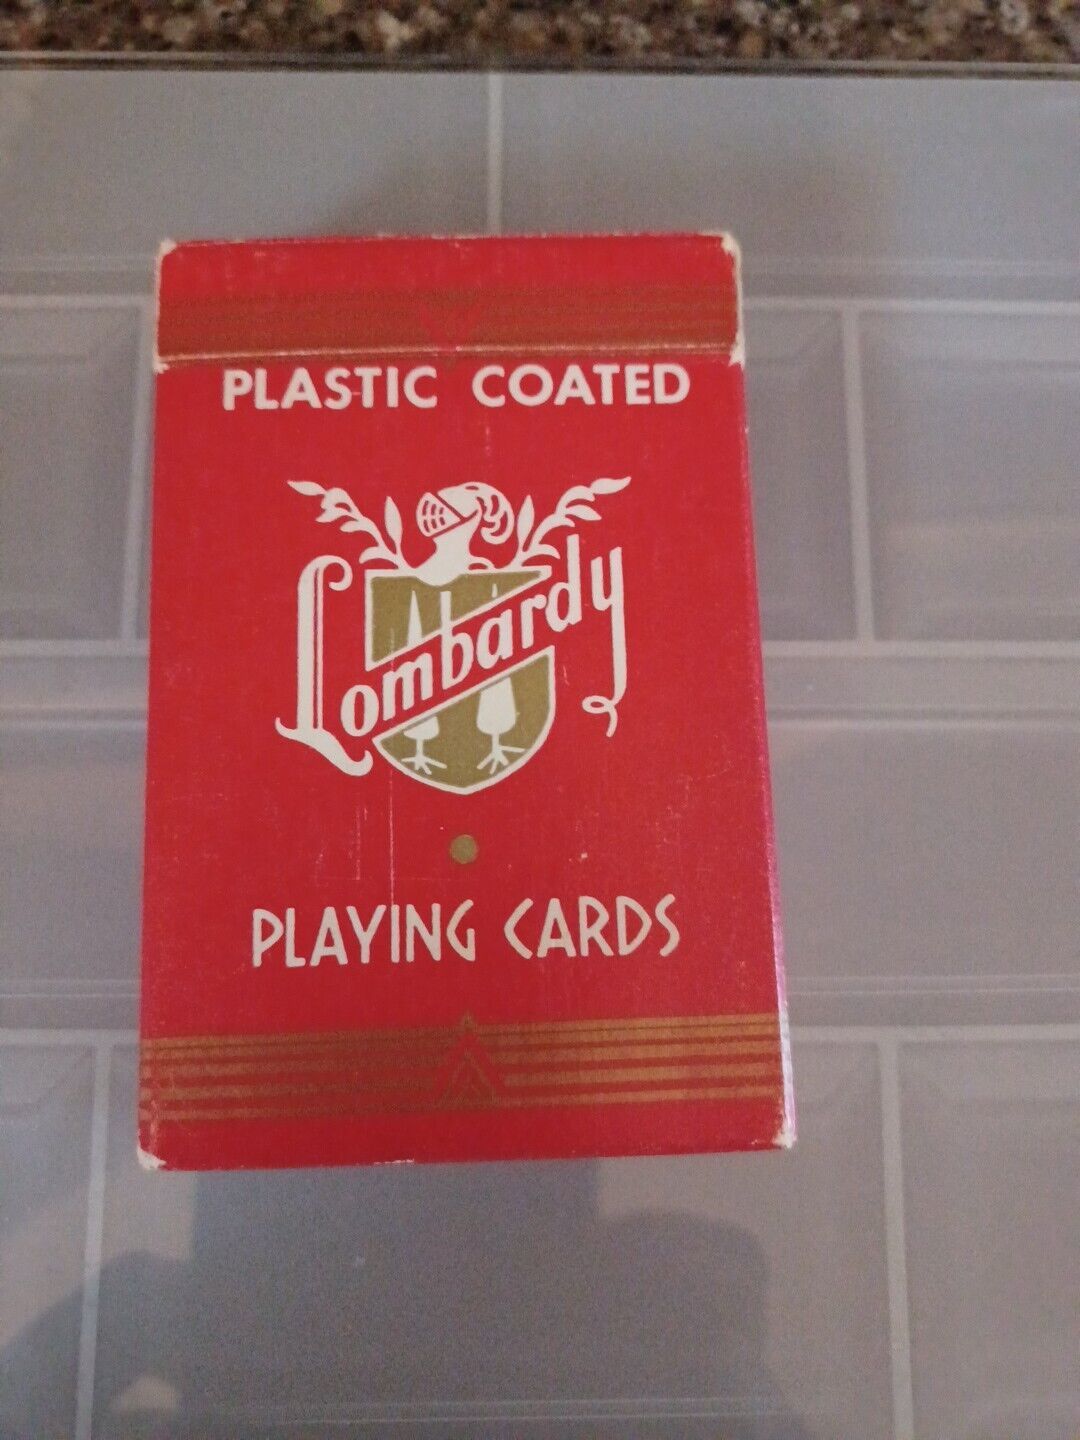 Vintage Lombardy Plastic Coated Playing Cards Red Version Arrco